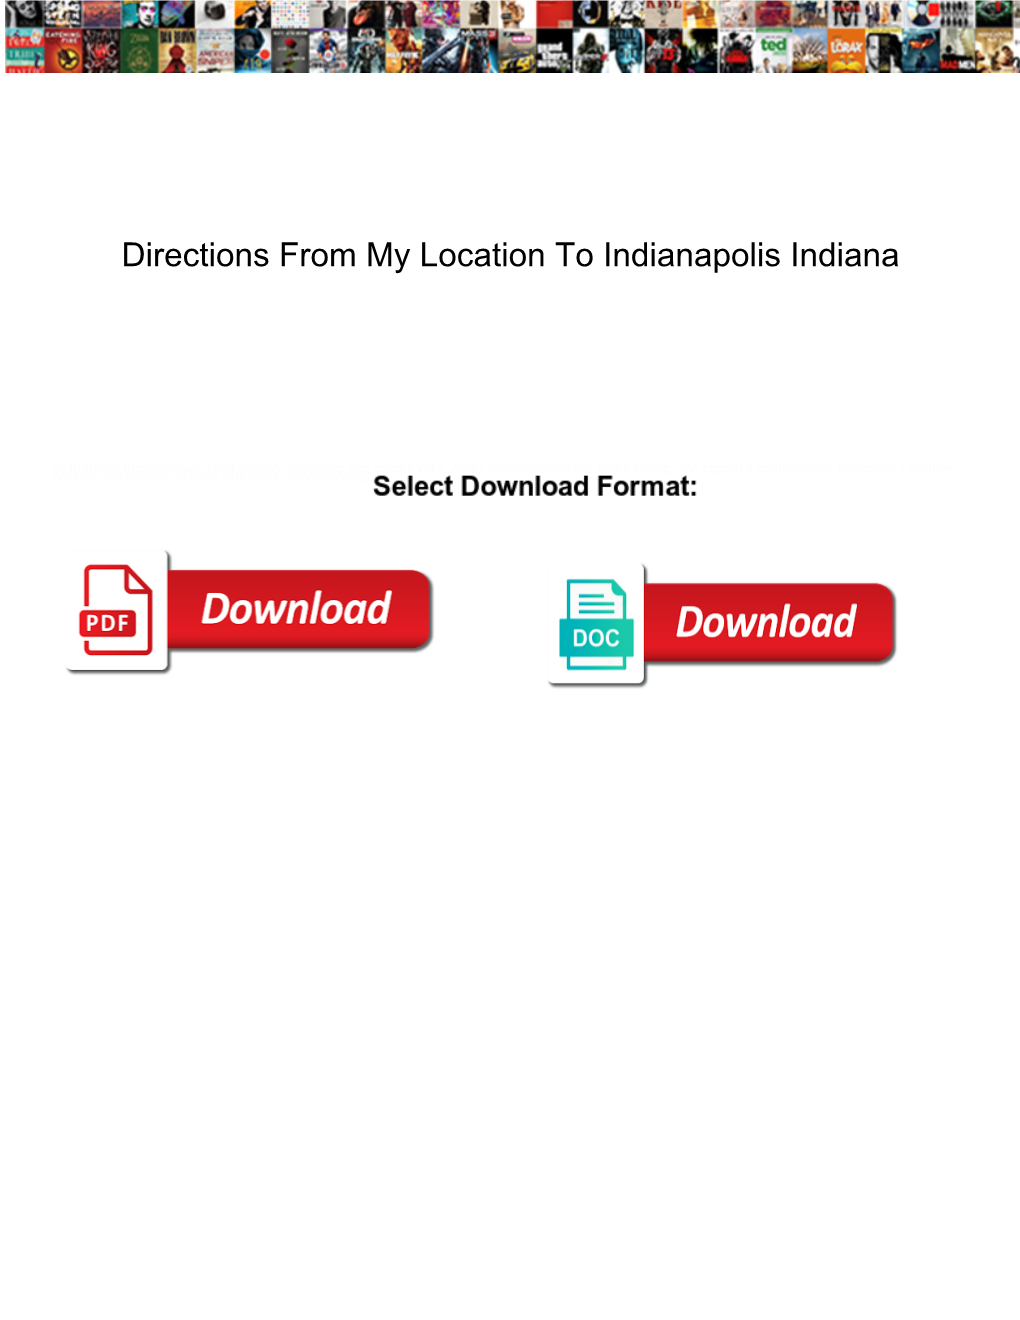 Directions from My Location to Indianapolis Indiana